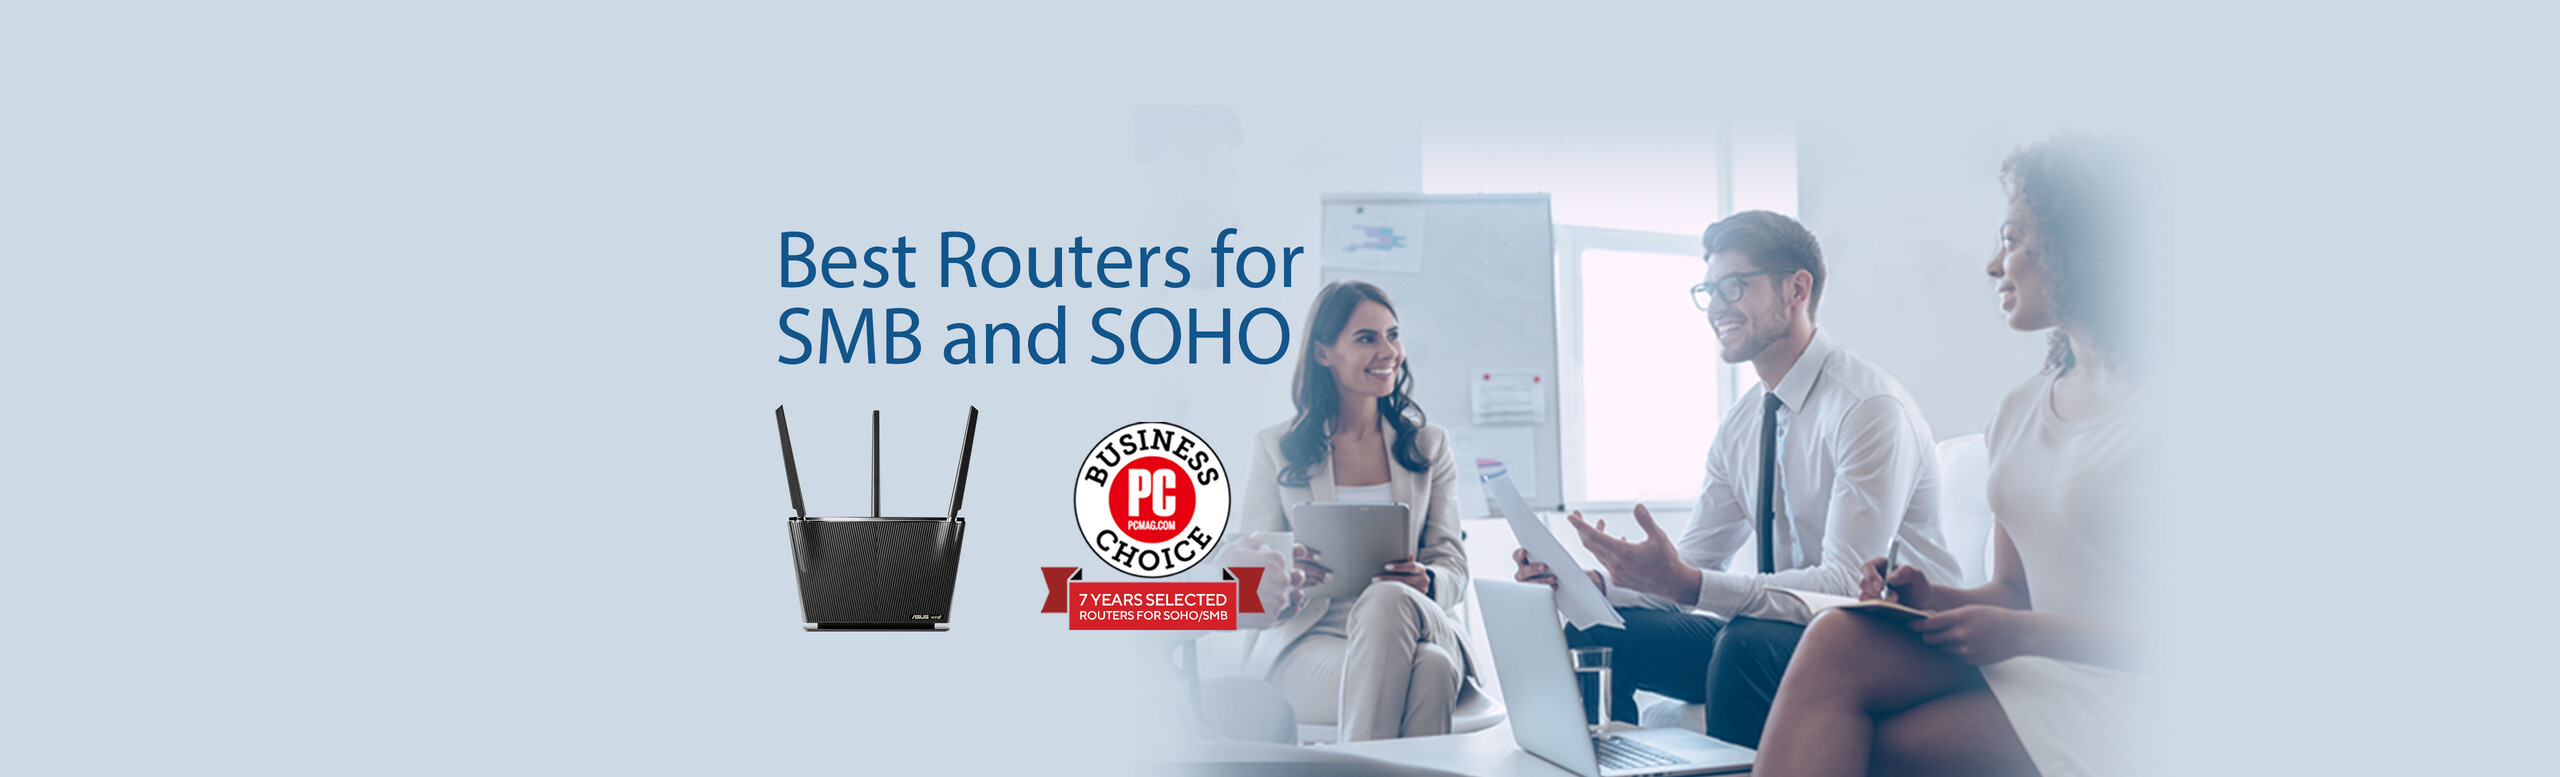 Best routers for SMB and SOHO